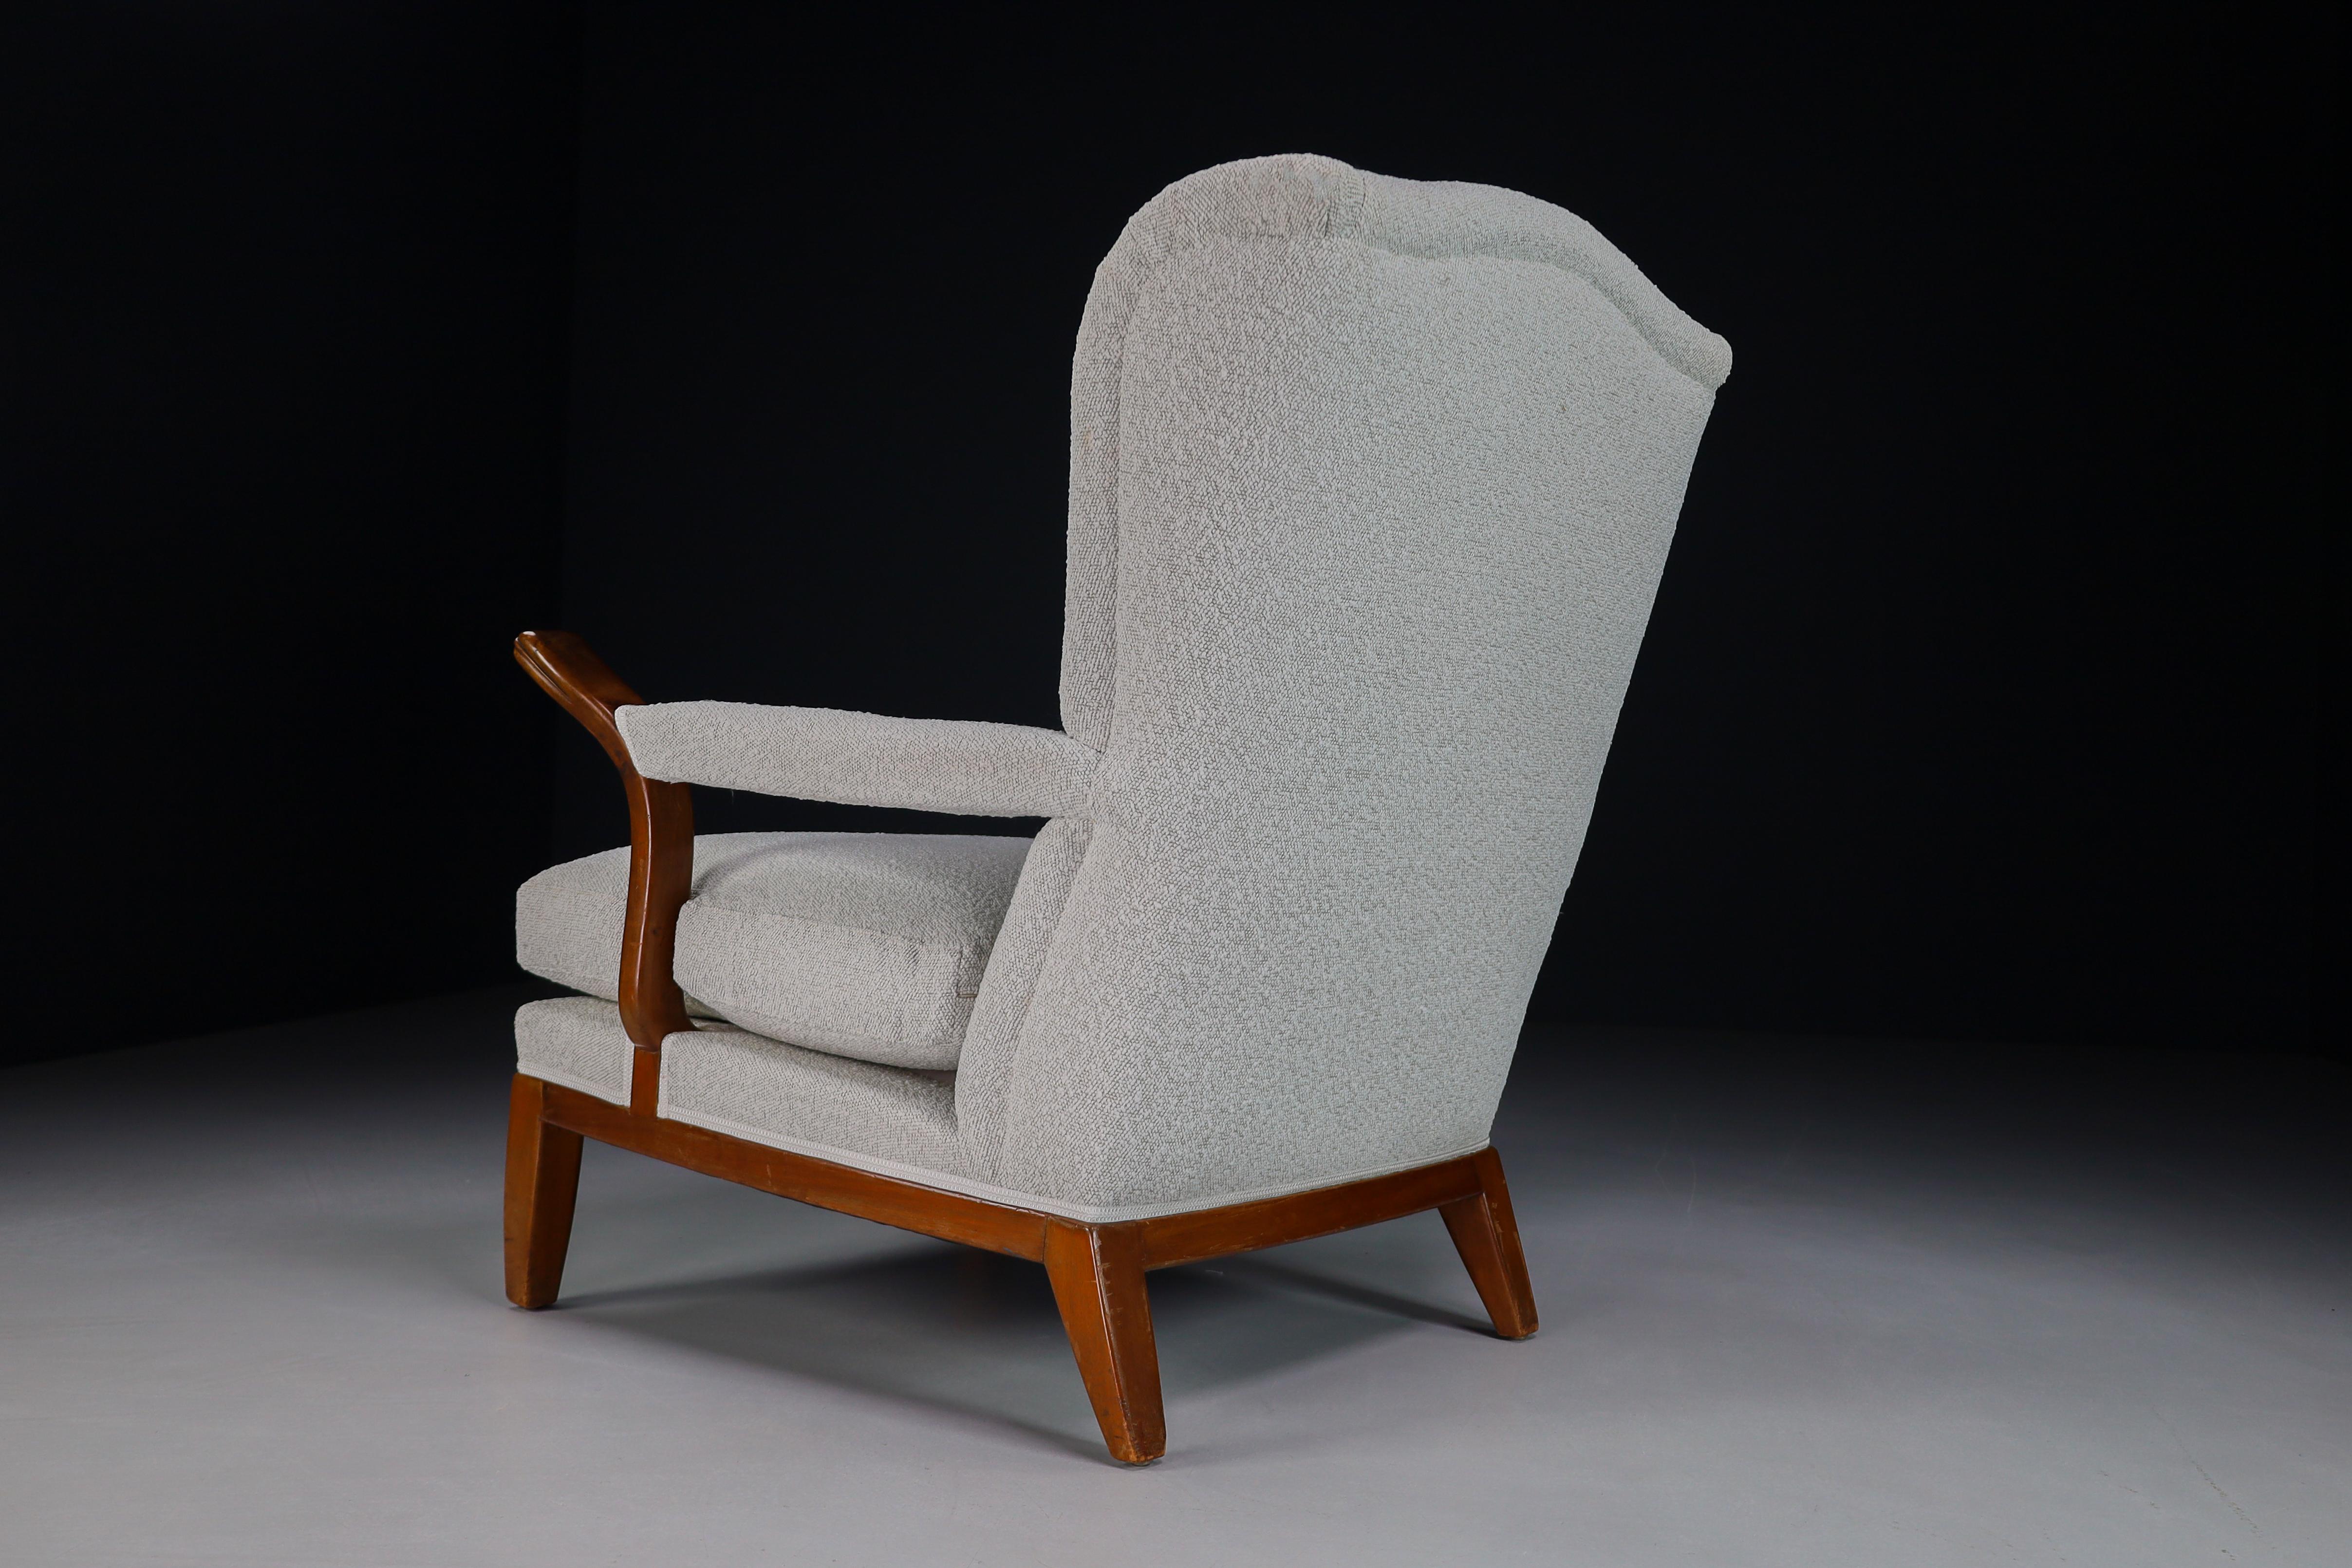 20th Century Large Wingback Chair in Walnut and New Bouclé Fabric, France, 1930s For Sale